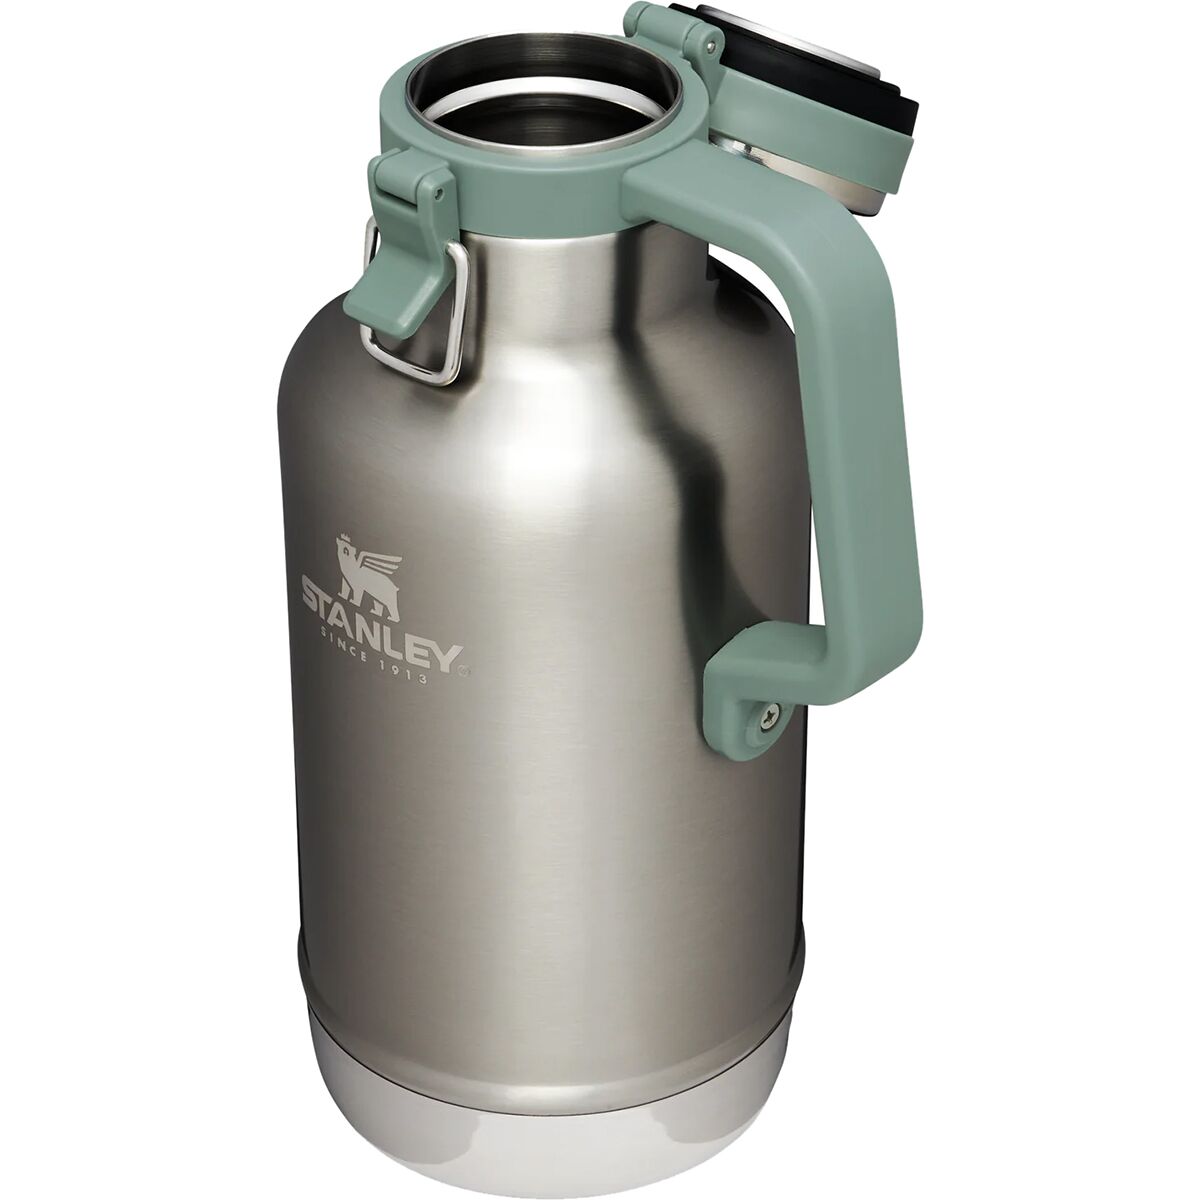 Stanley Classic Easy-Pour Growler 64oz - HPG - Promotional Products Supplier